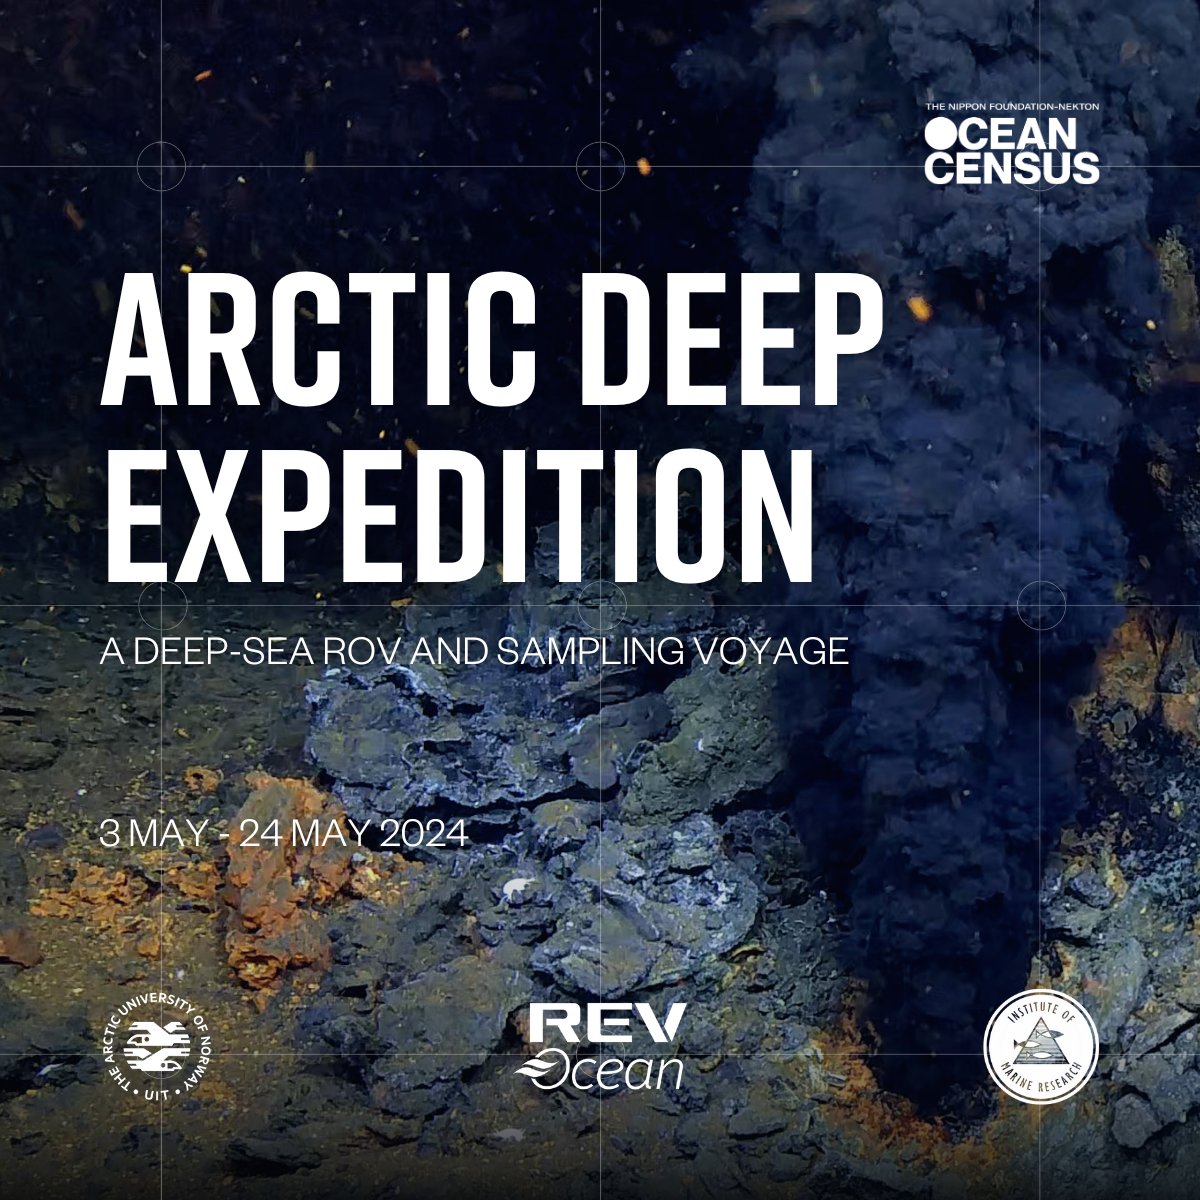 📣 Today, we embark on our most scientifically ambitious and technologically advanced expedition, #ArcticDeep. Together, 36 scientists and media experts will explore the deep #ocean ridges and #biodiversity of the Arctic Sea. Learn more 👉 oceancensus.org/expeditions/ar…